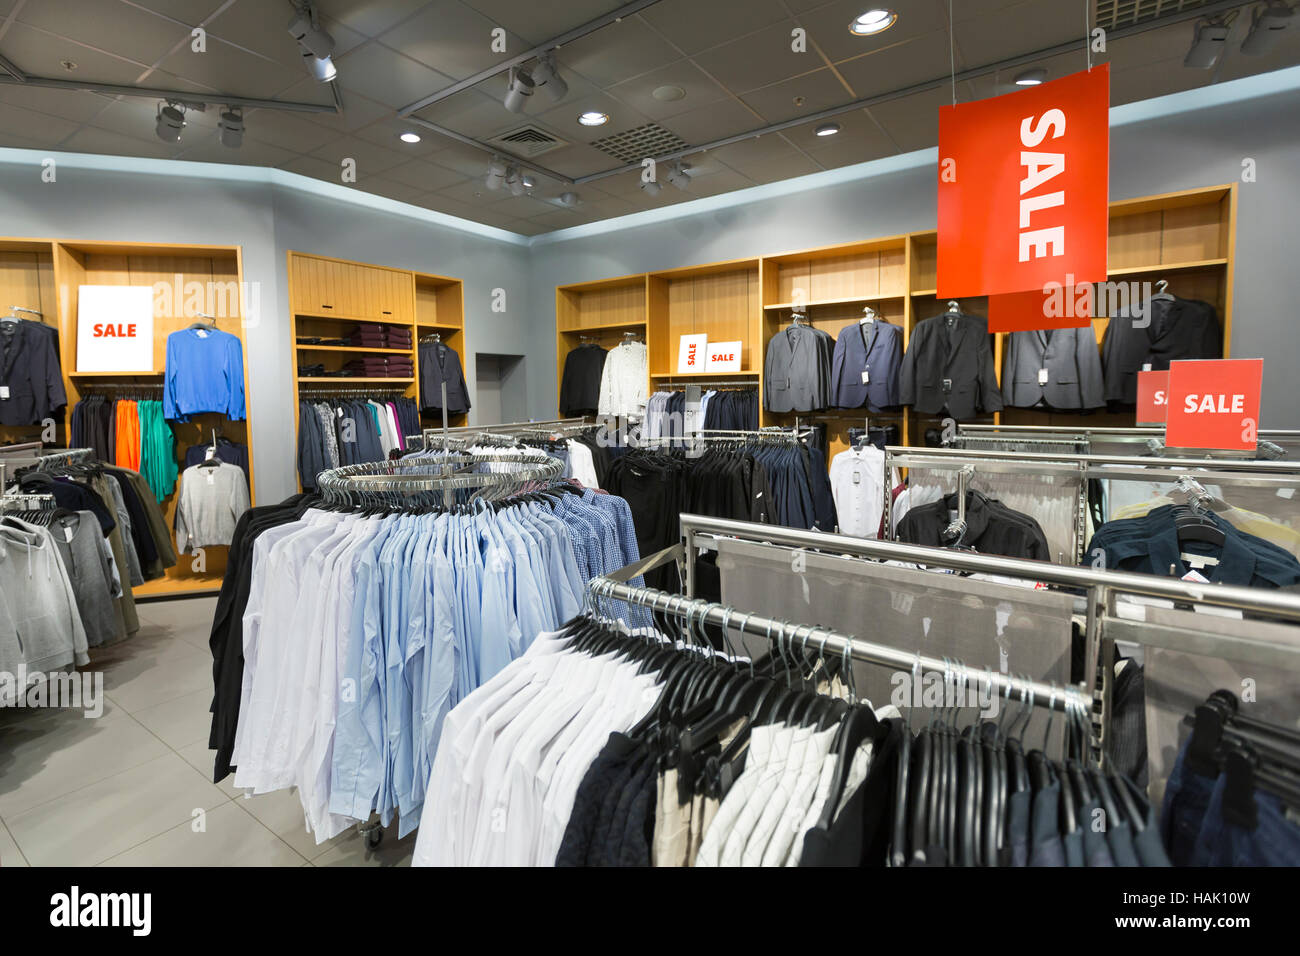 sale in men's clothing store Stock Photo